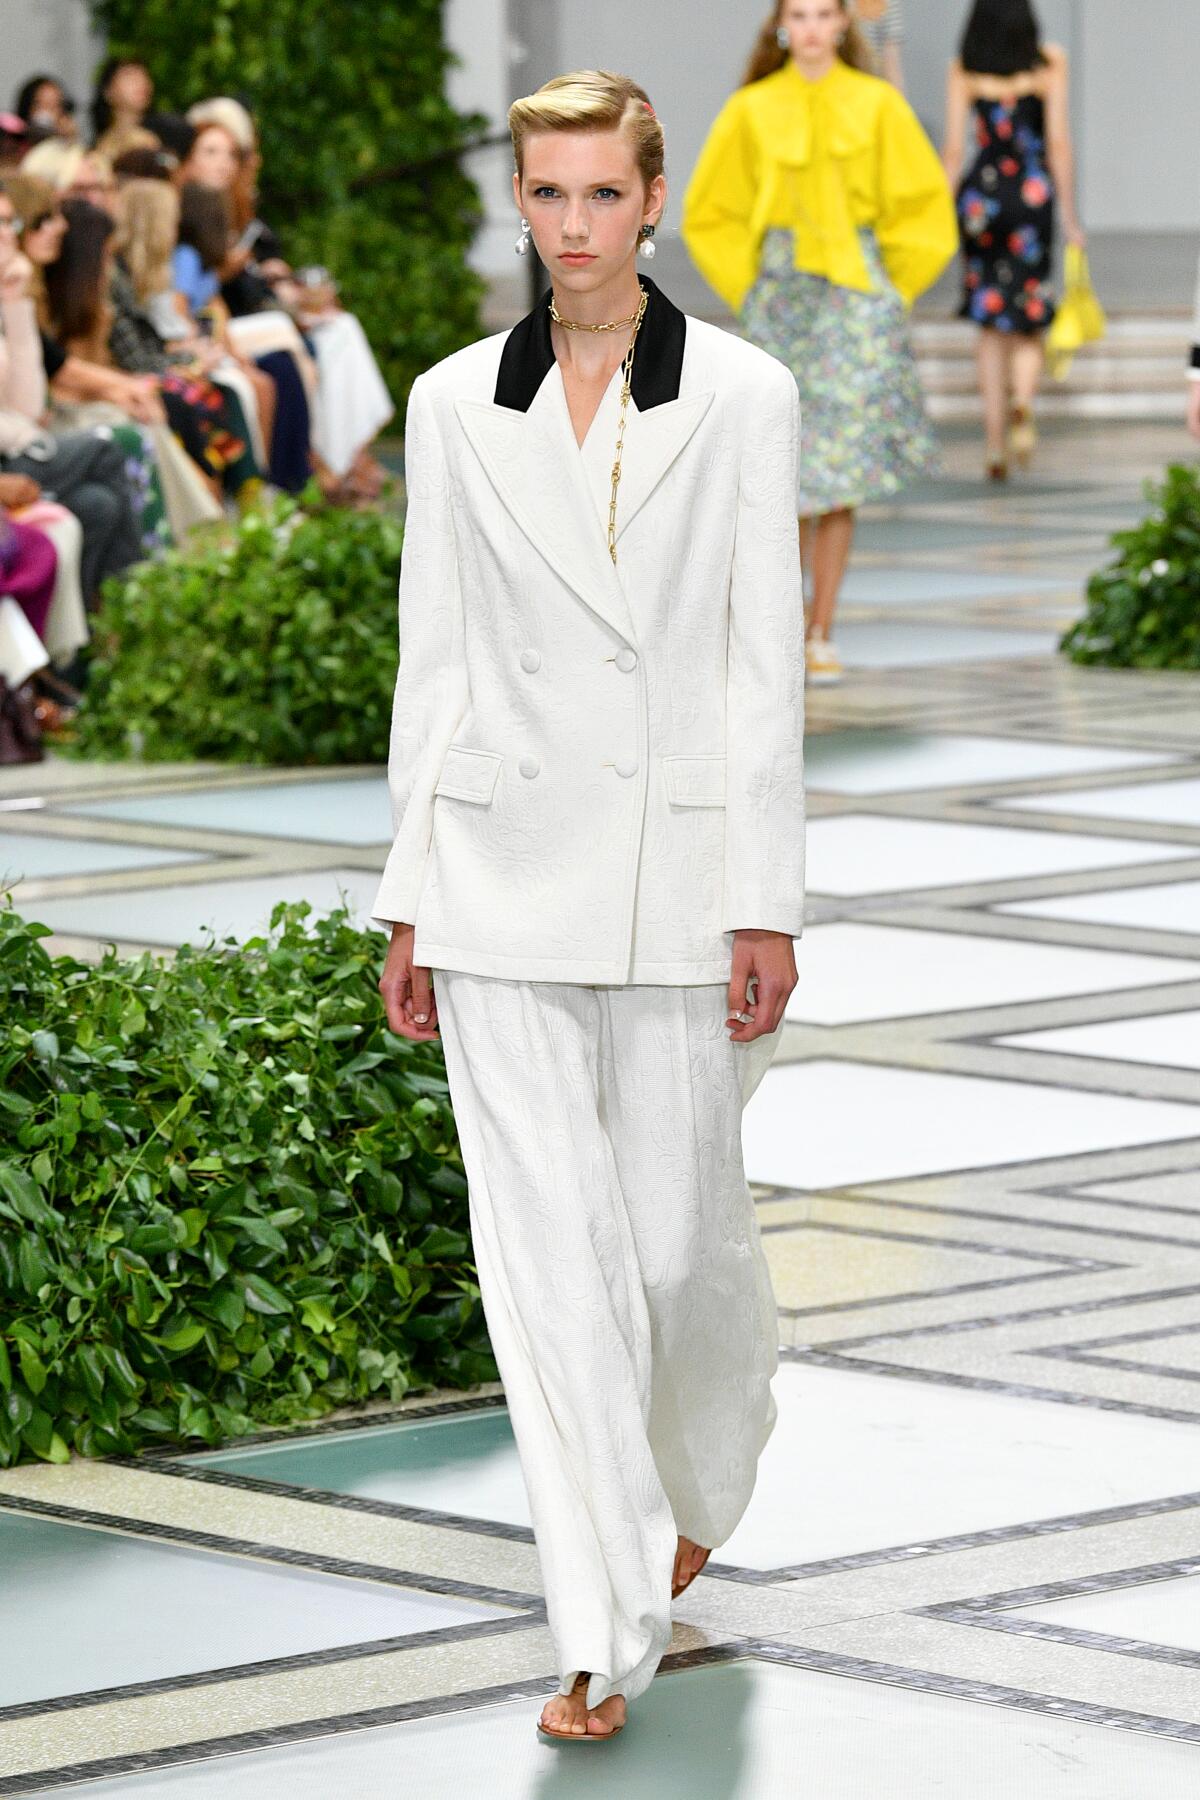 A photo of a model on the runway during Tory Burch's New York Fashion Week show. 